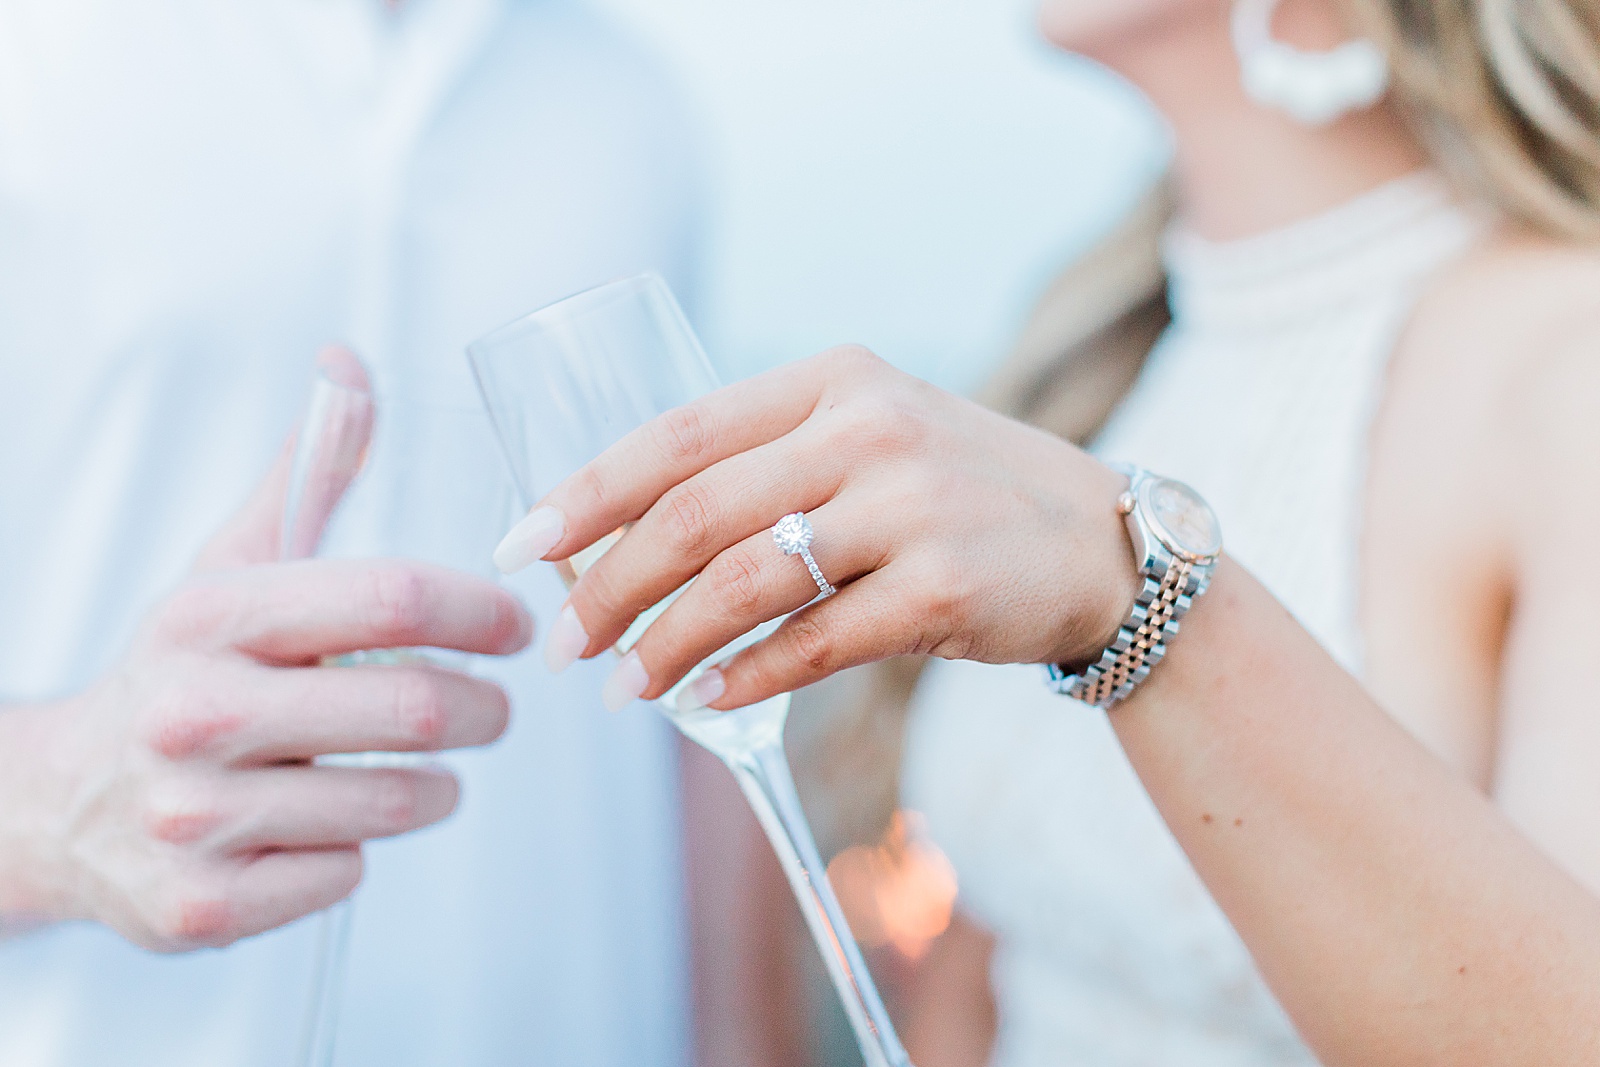 Champagne Glasses with Newly Engaged Couple